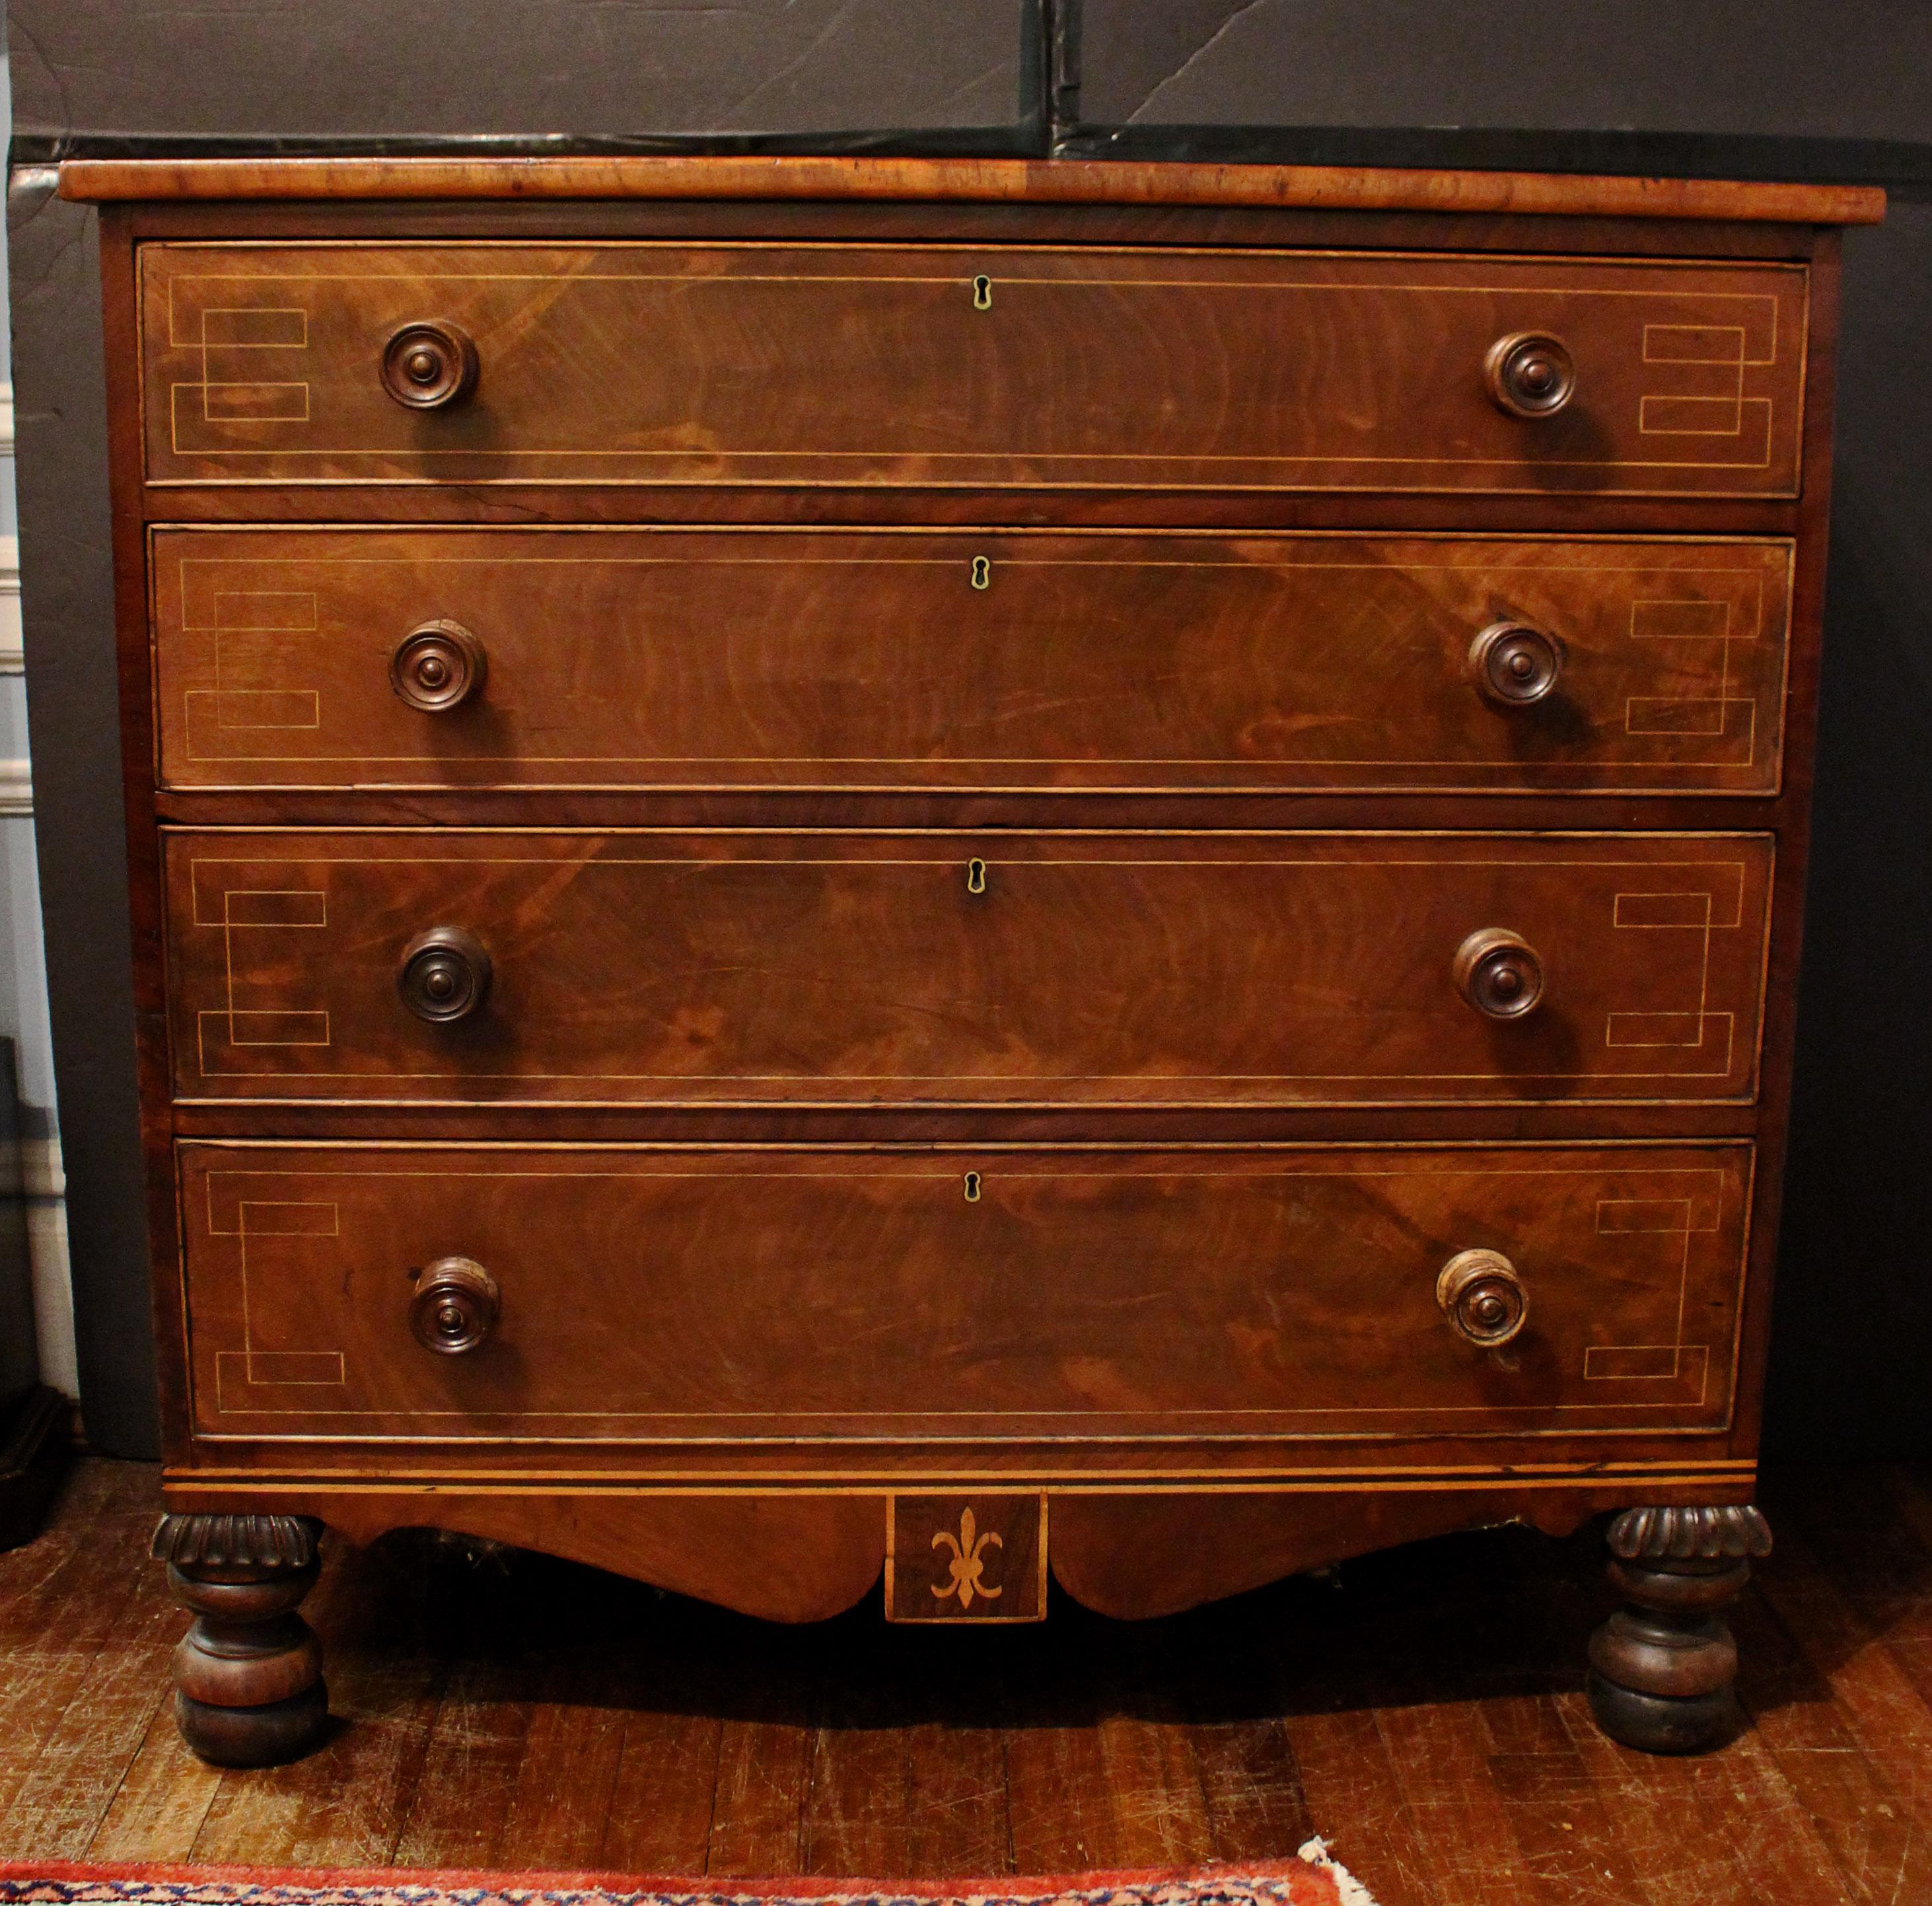 Circa 1810 Channel Islands 4-drawer chest of drawers, English. Mahogany. Chestnut drawer lining, typical of Channel Island construction. Charming design with 4 long graduated drawers each with elongated Greek key stringing (also on the top) over